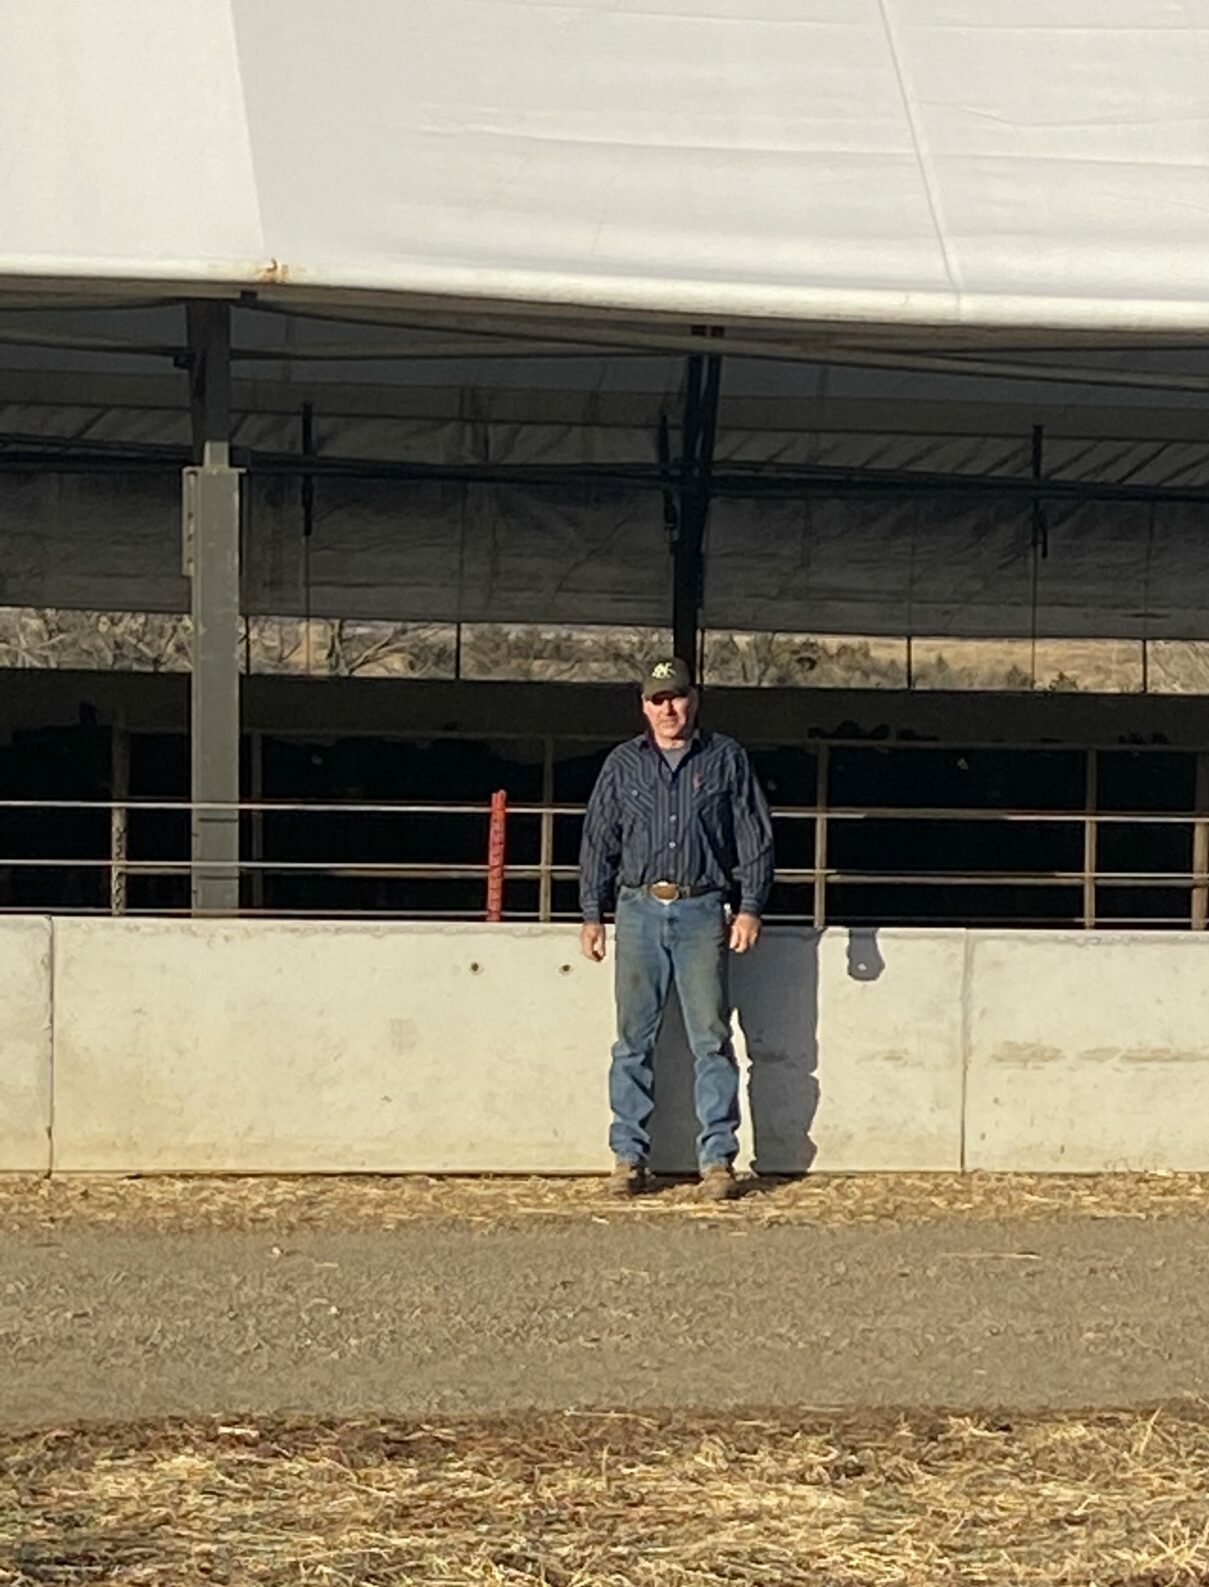 Chad Kehn in front of his cattle operation